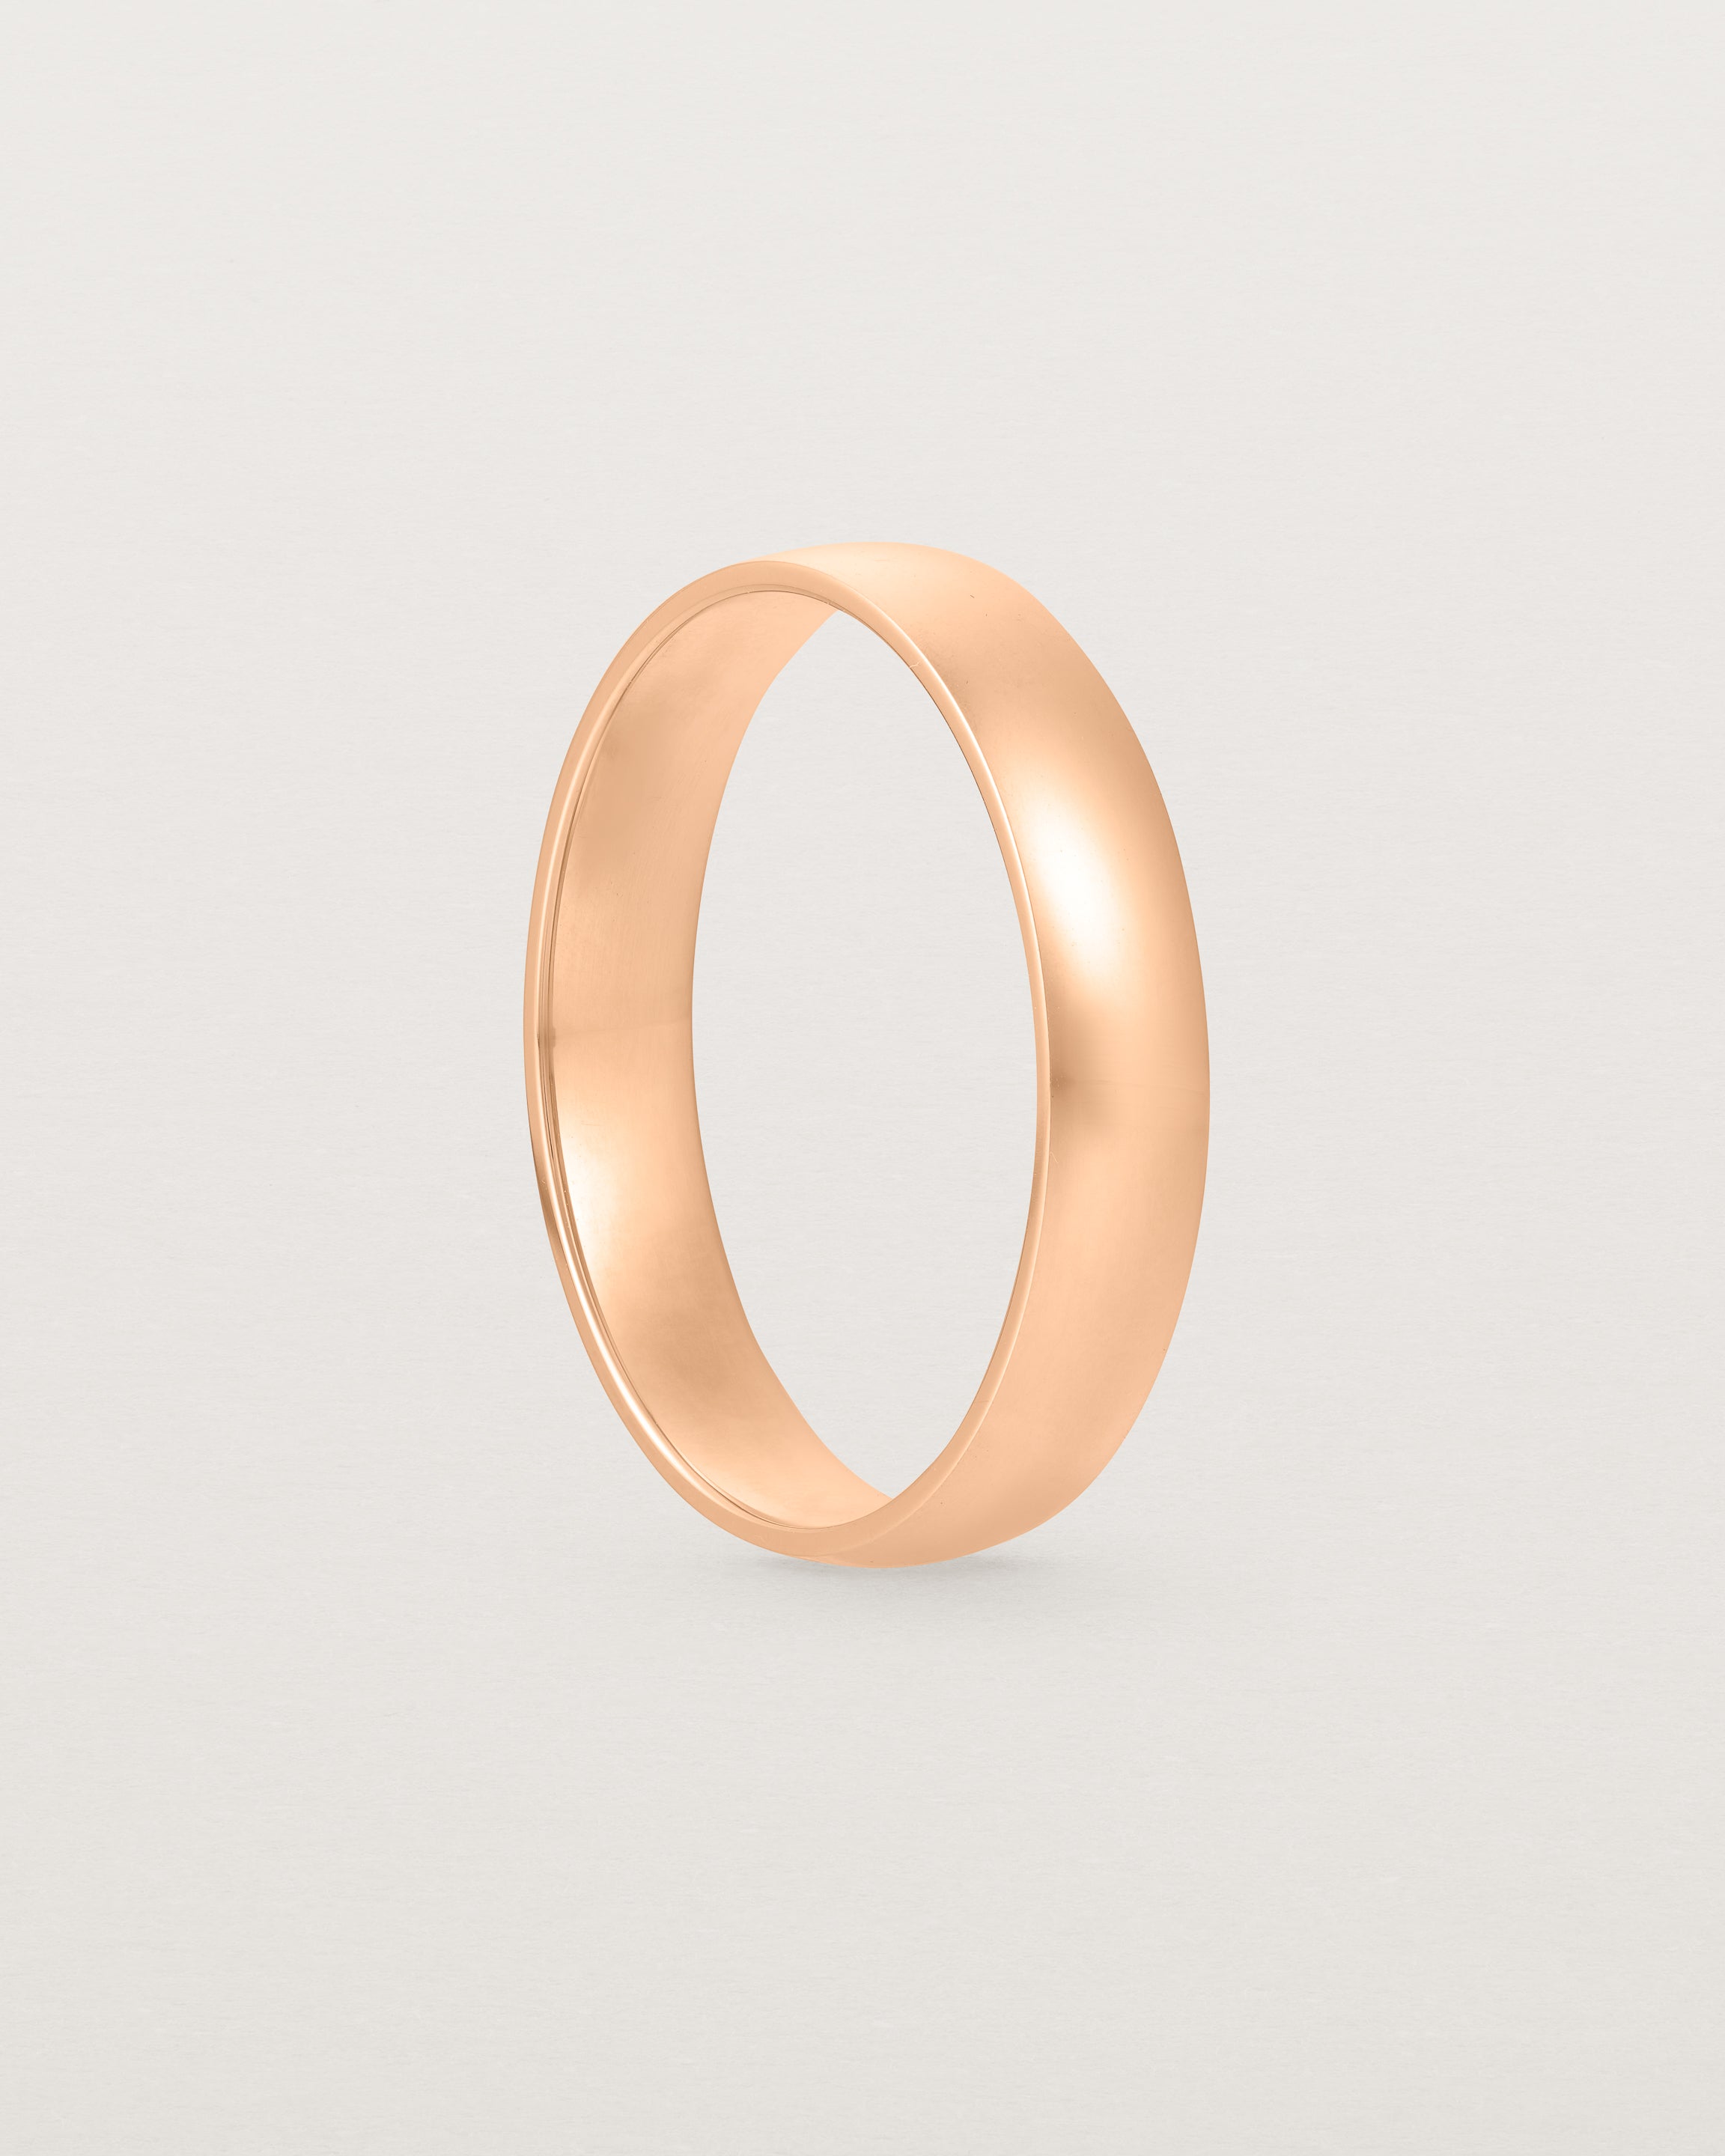 A classic 4mm wedding band crafted in rose gold